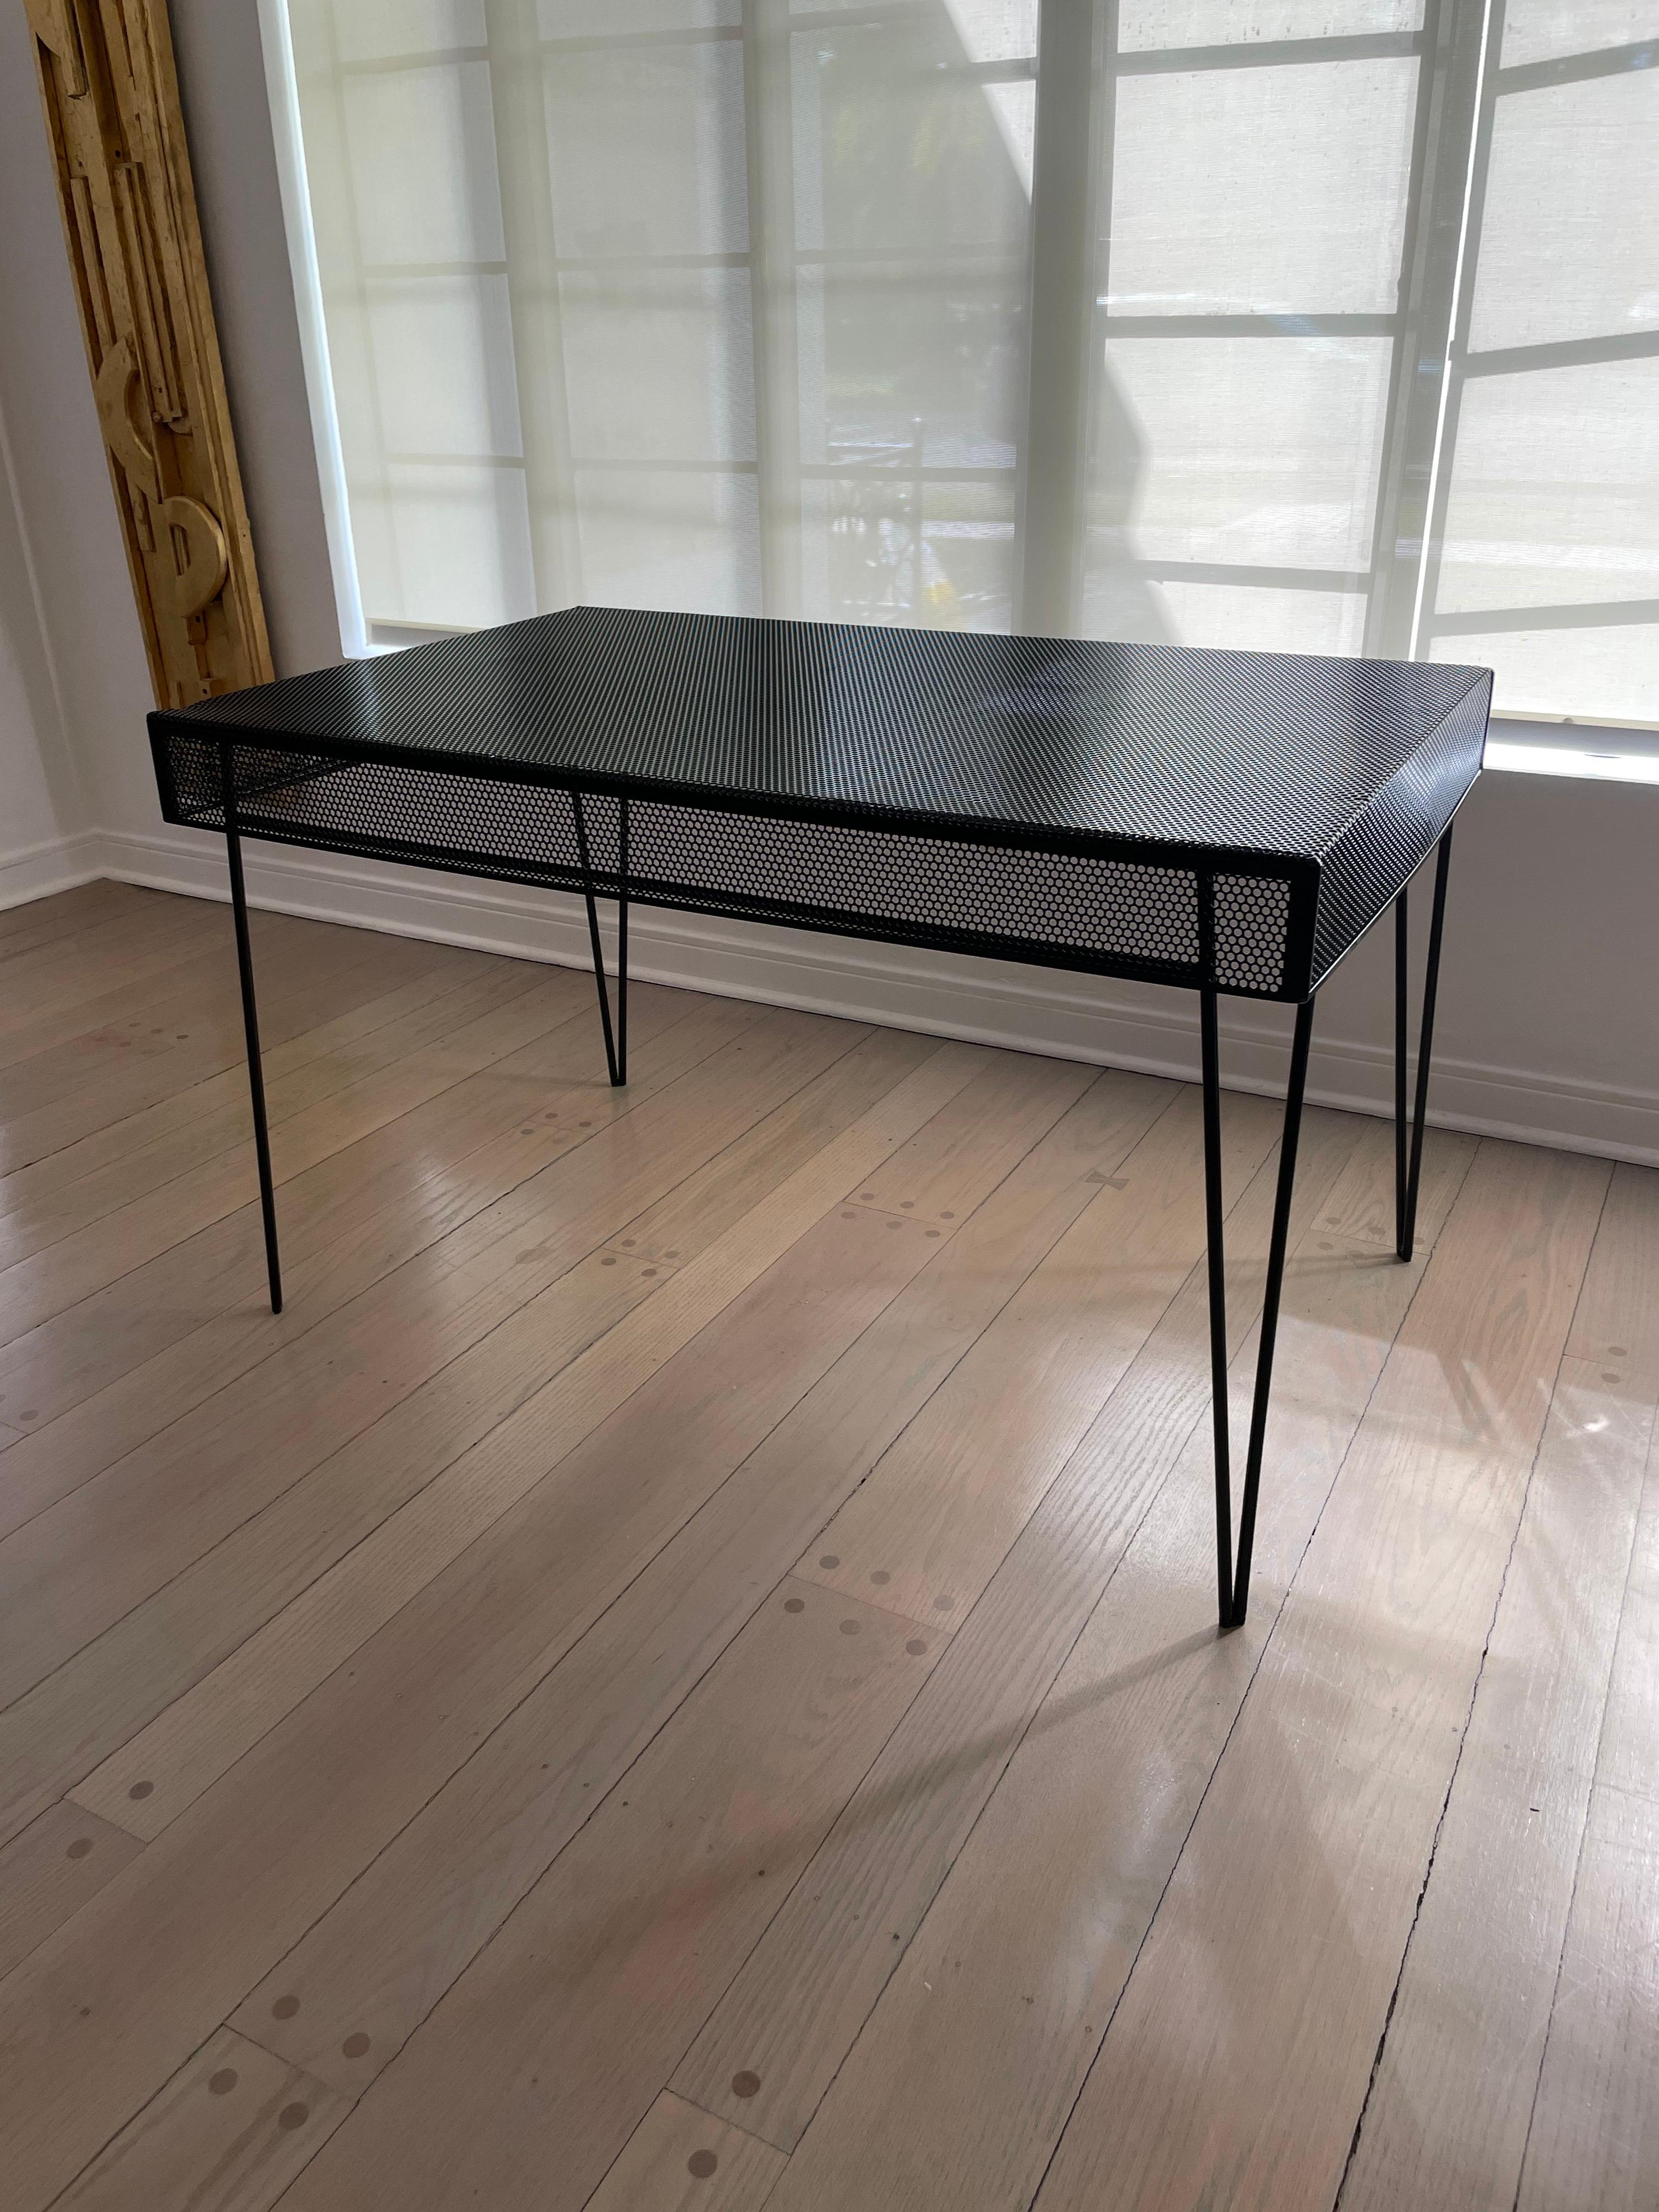 Powder-coated in black this metal table with a draped mesh top and hairpin legs. This is an awesome and chic table indoors as well as outdoors.